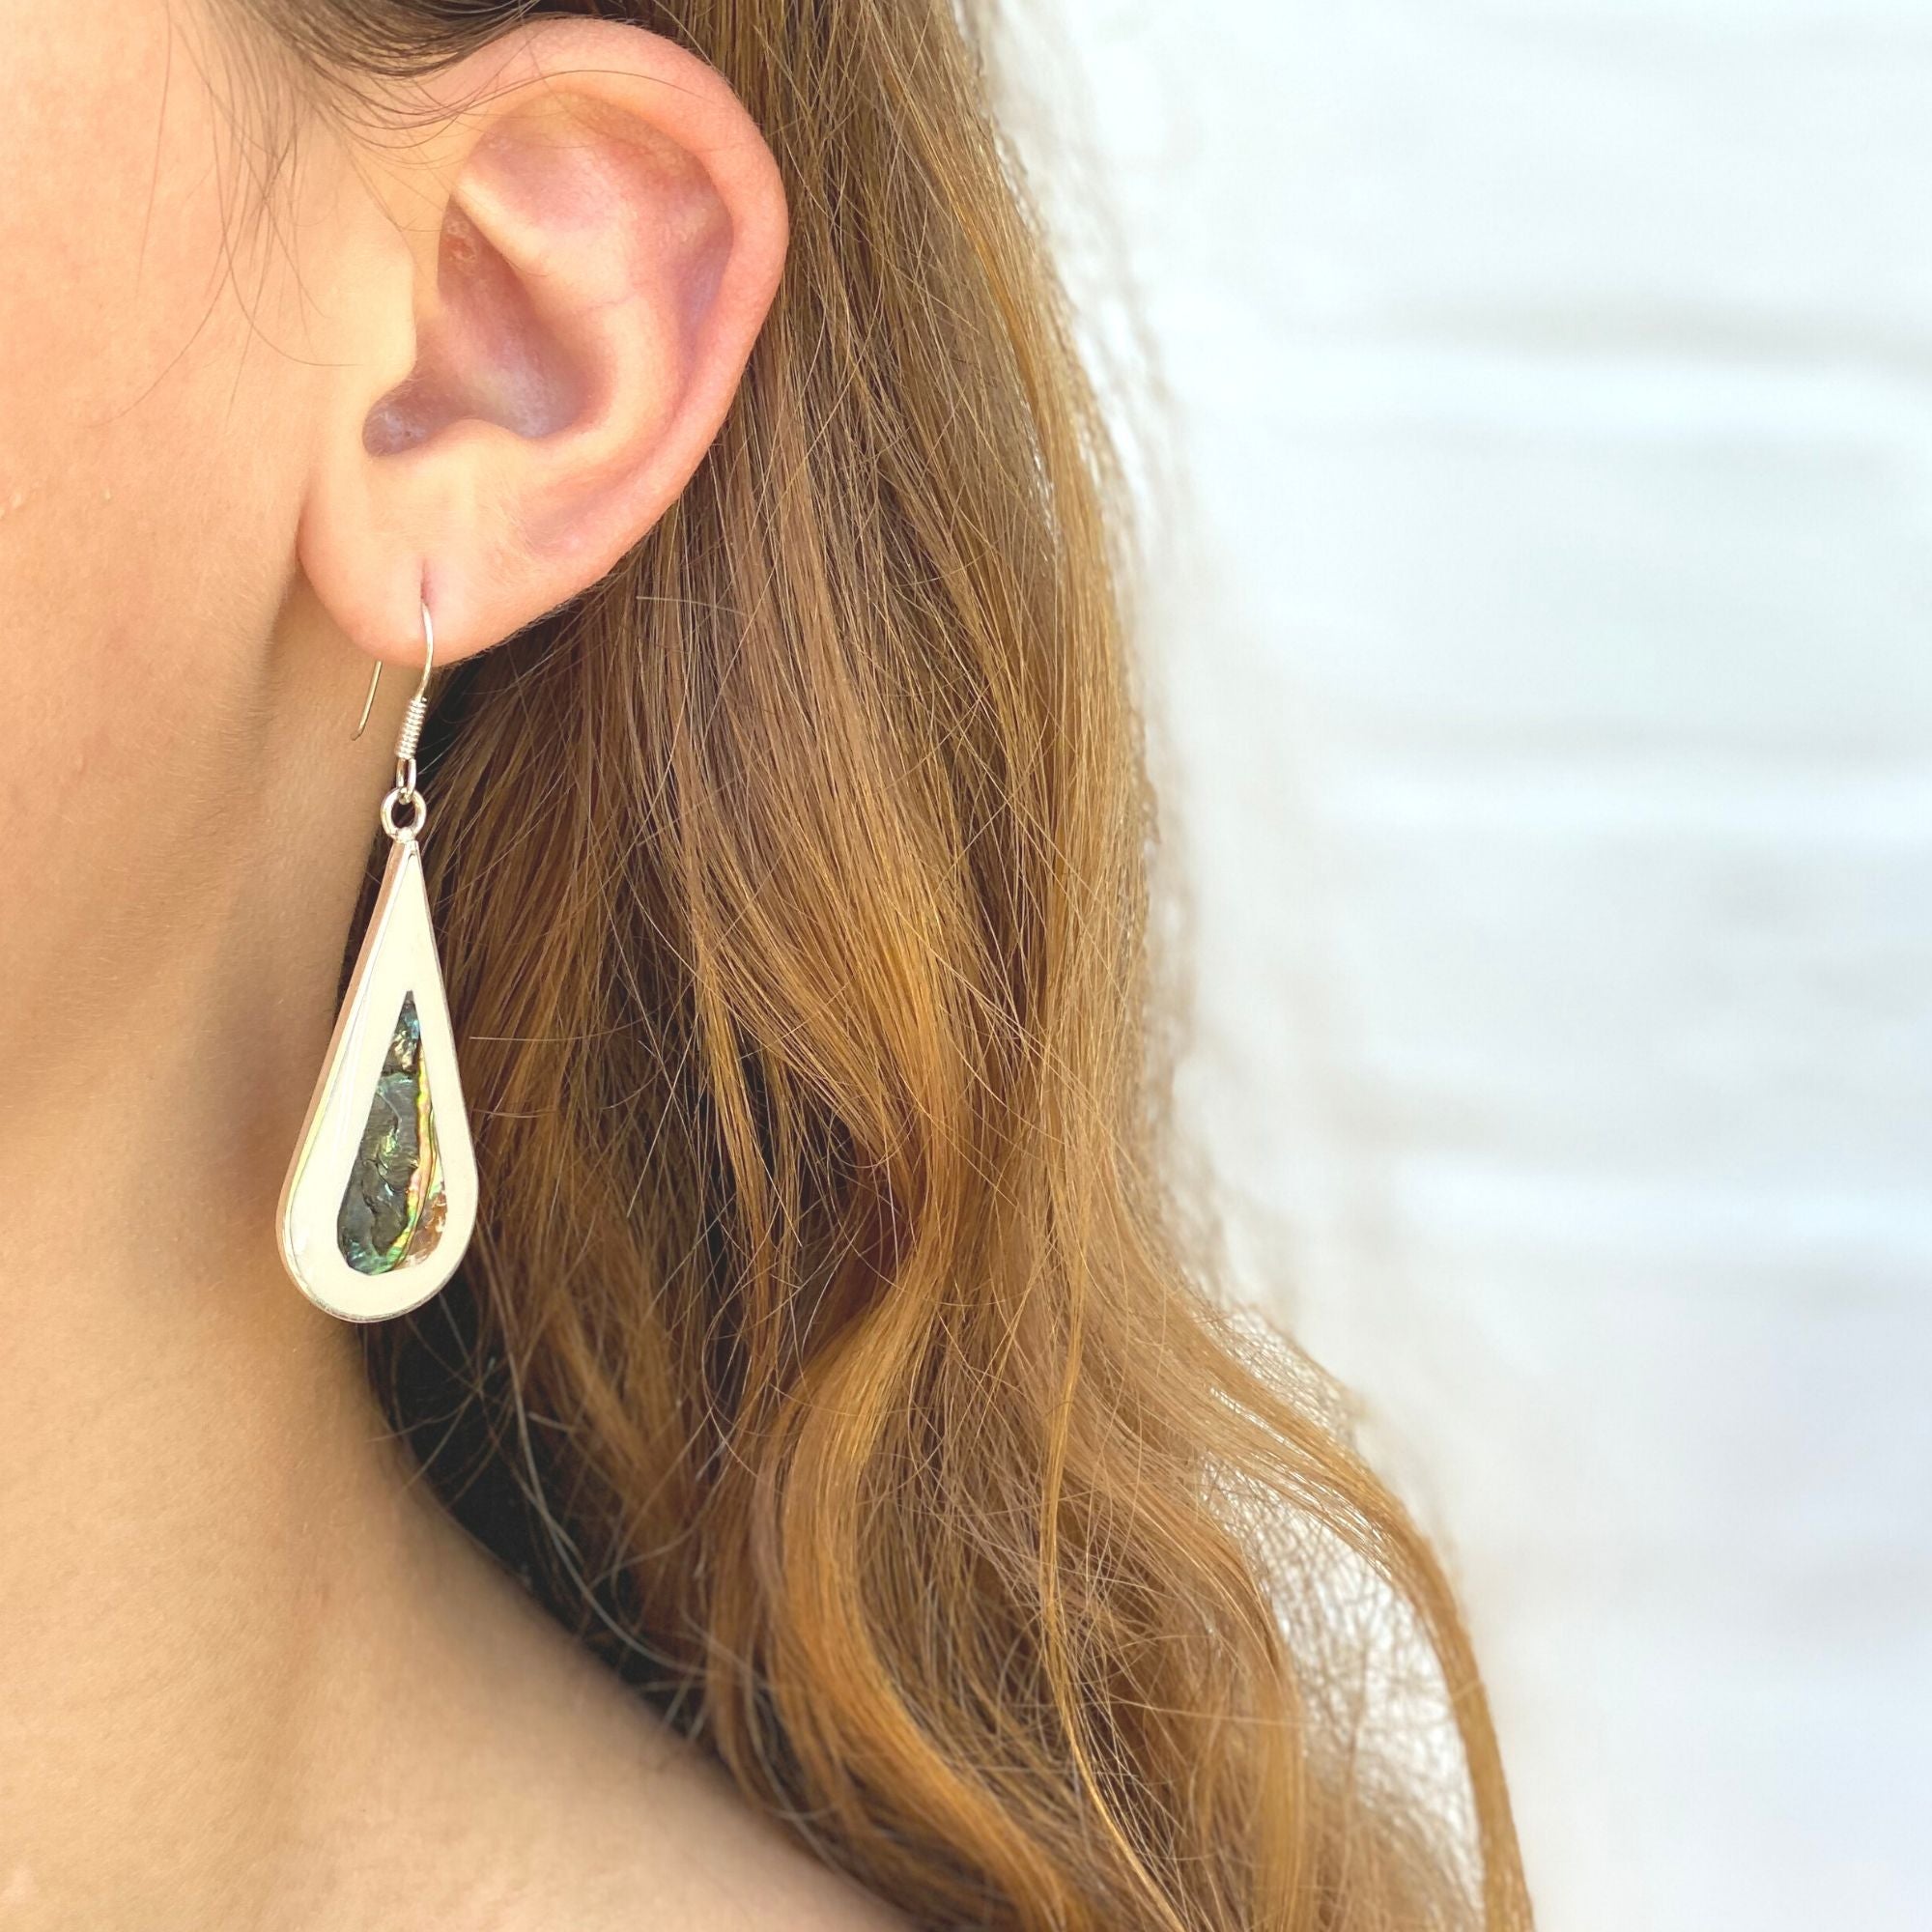 Teardrop Abalone and Mother of Pearl Drop Earrings